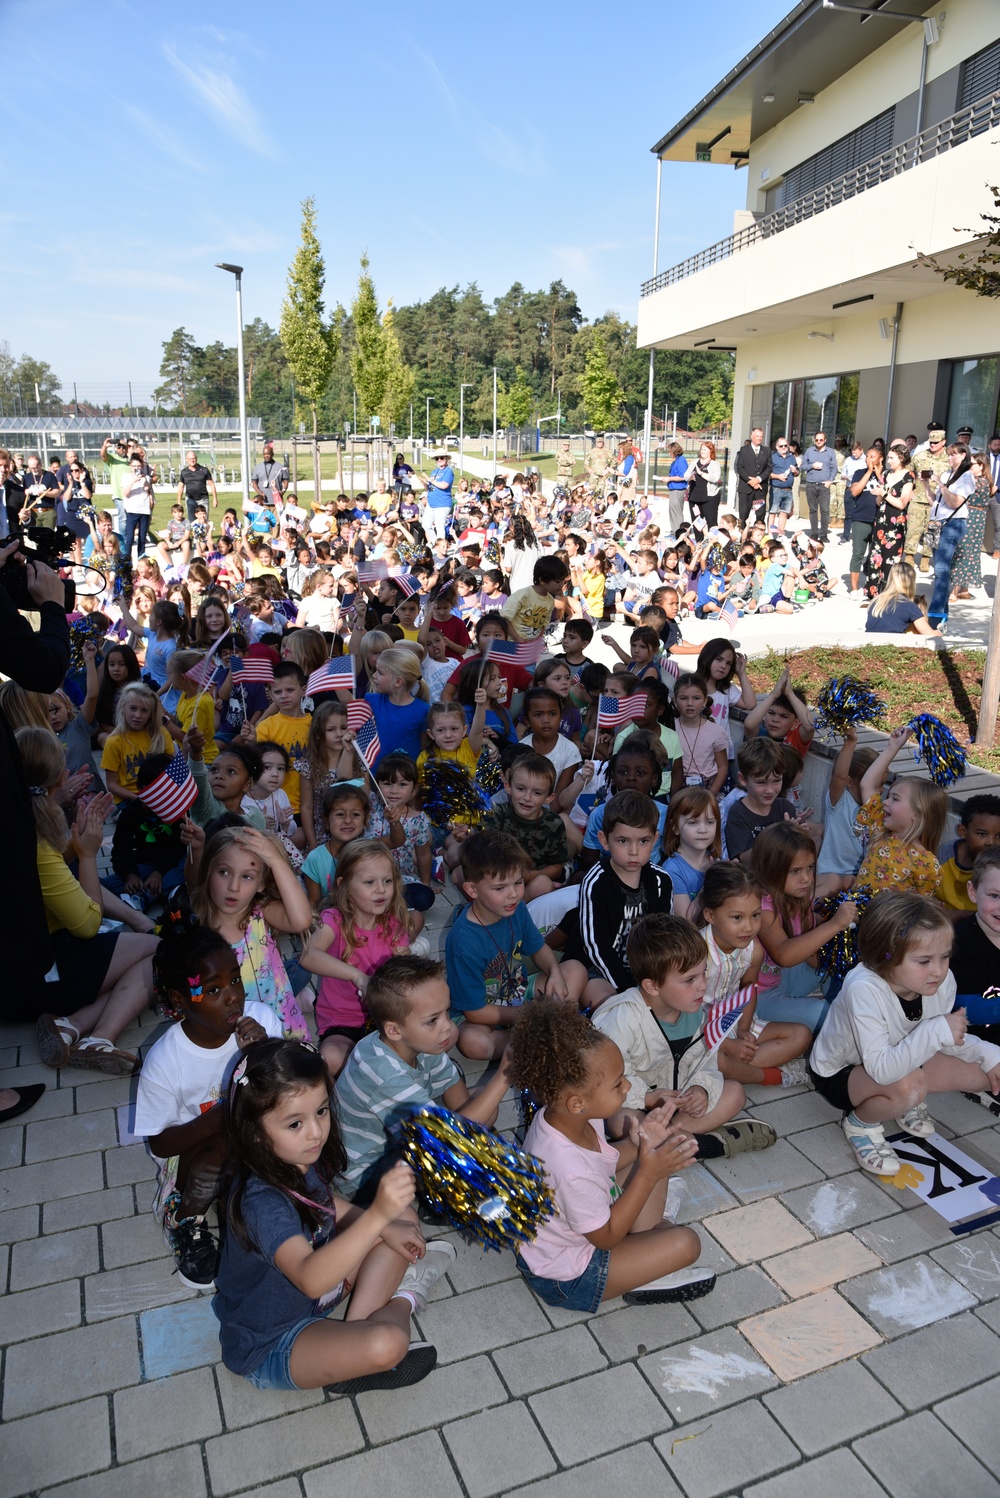 Students, faculty and Army leaders celebrate new DoDEA school in Grafenwoehr